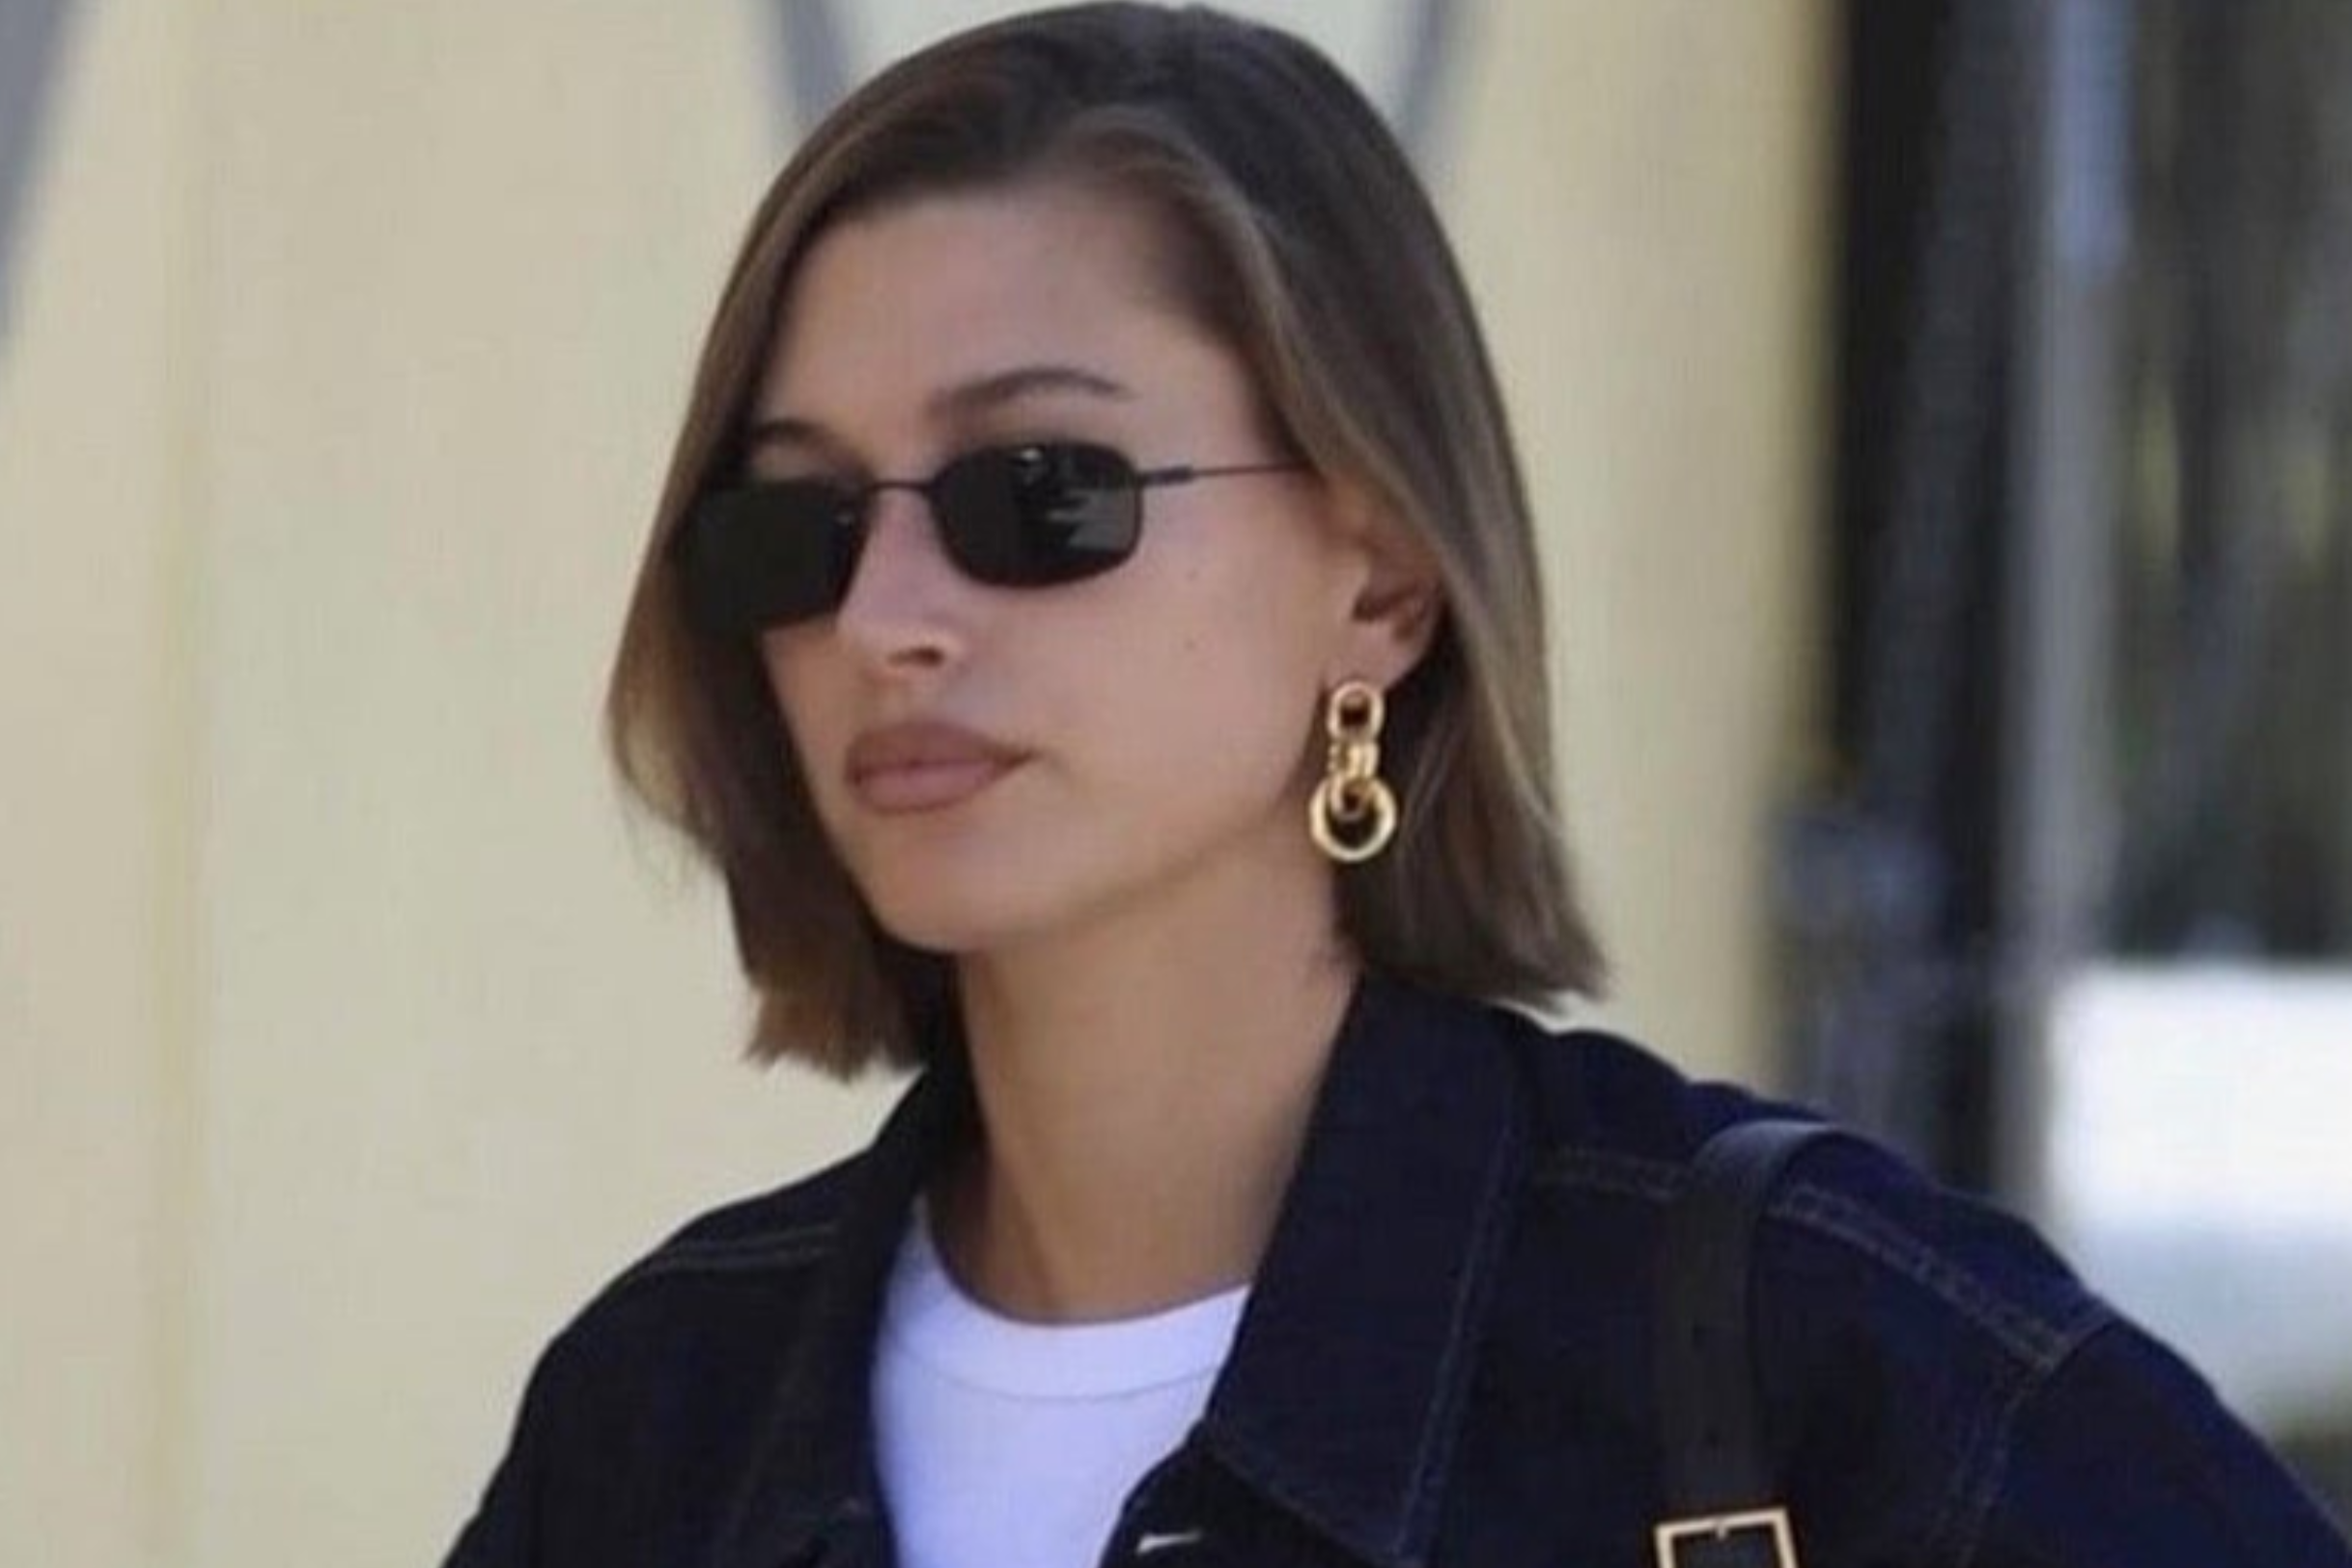 Hailey Bieber modeling NORBERT, a style within this trending 90s sunglasses collection